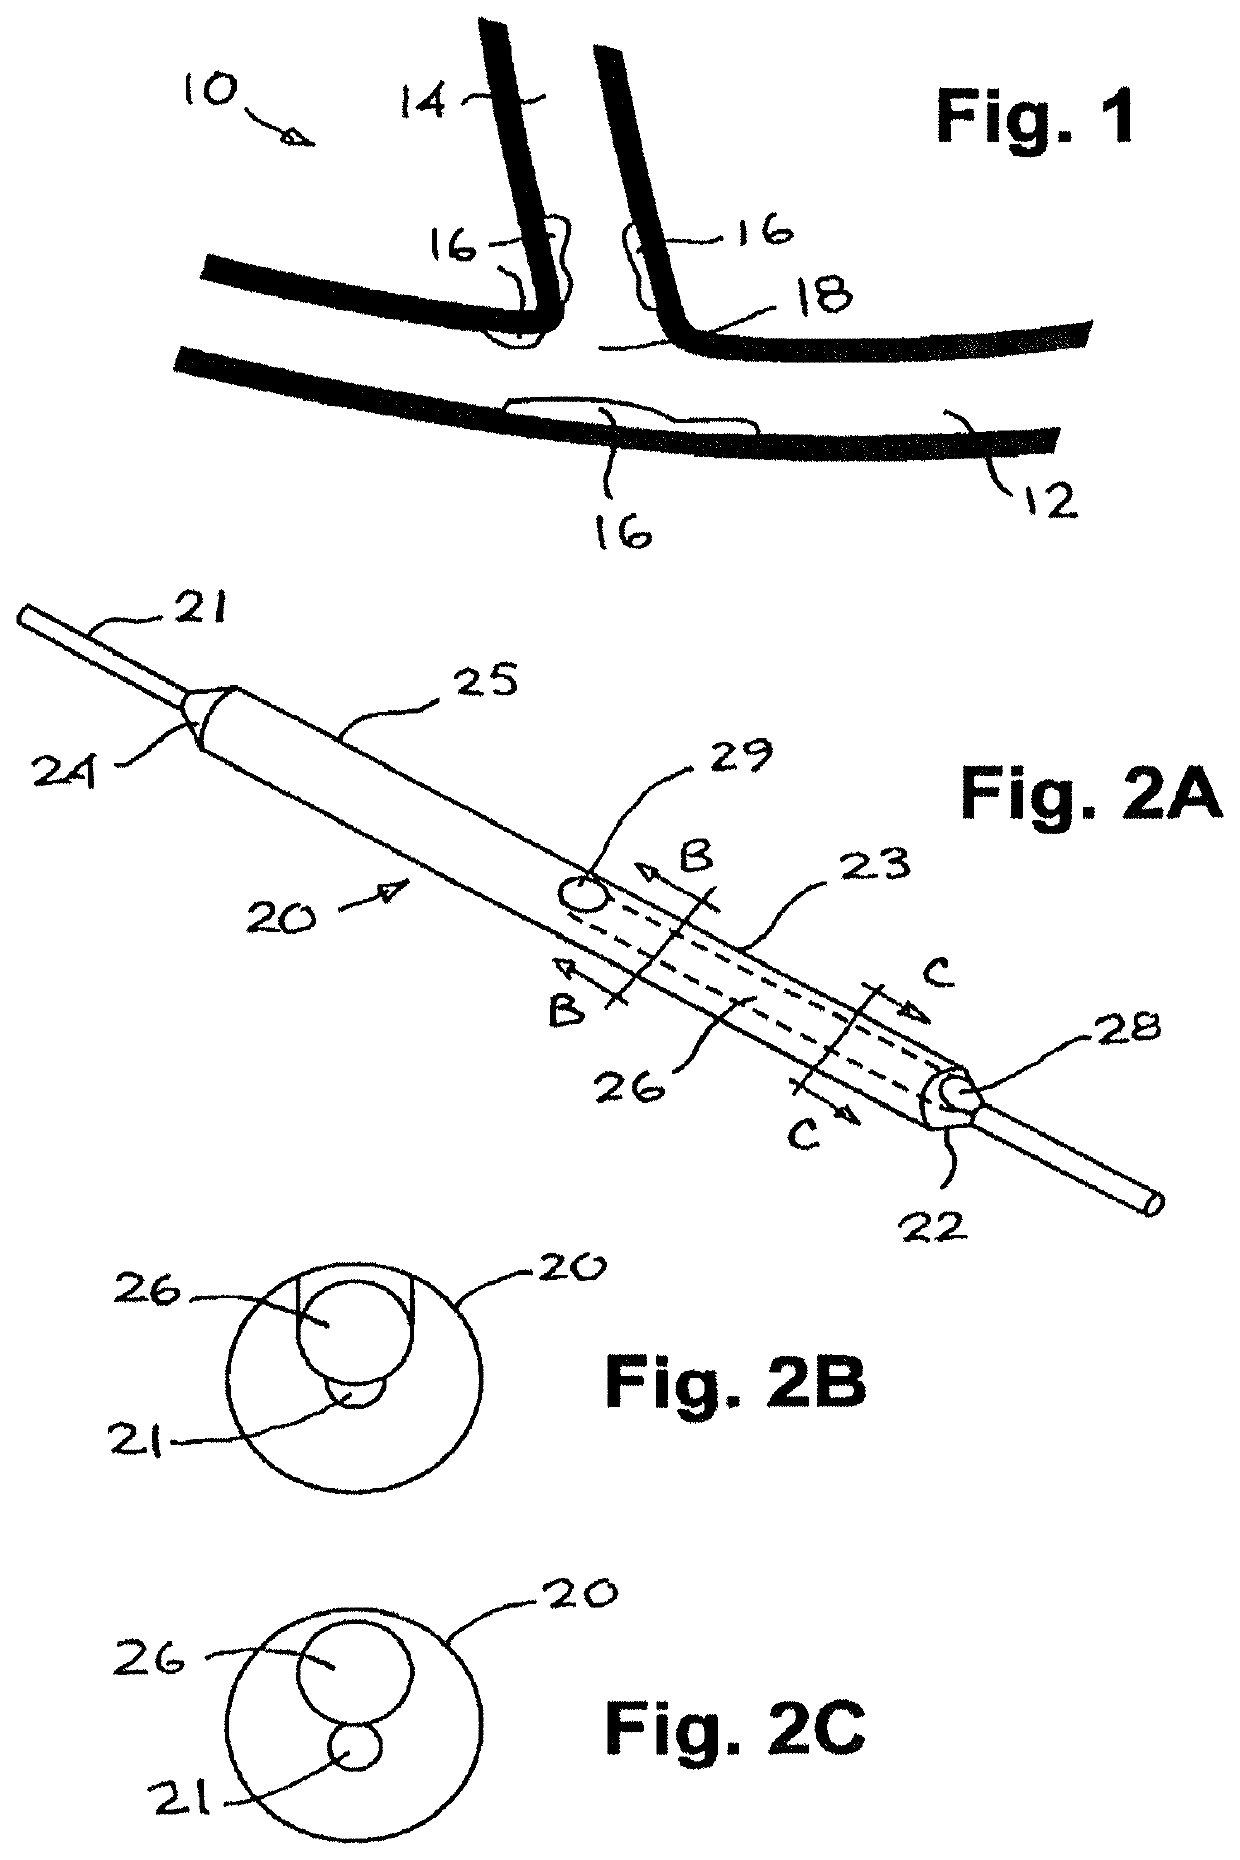 Bifurcated dual-balloon catheter system for bifurcated vessels